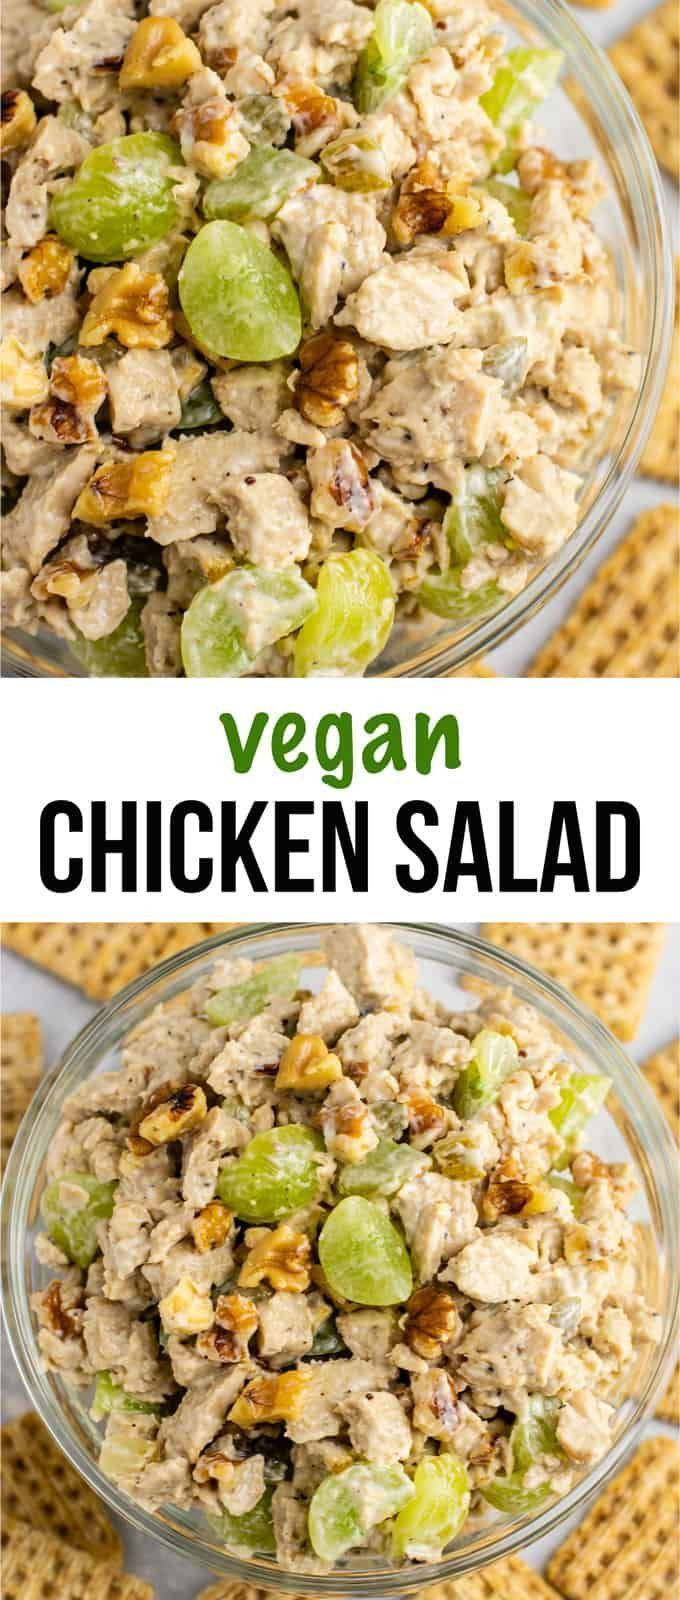 Whole Foods Vegan Chicken Salad
 Vegan chicken salad with grapes and pecans This is so